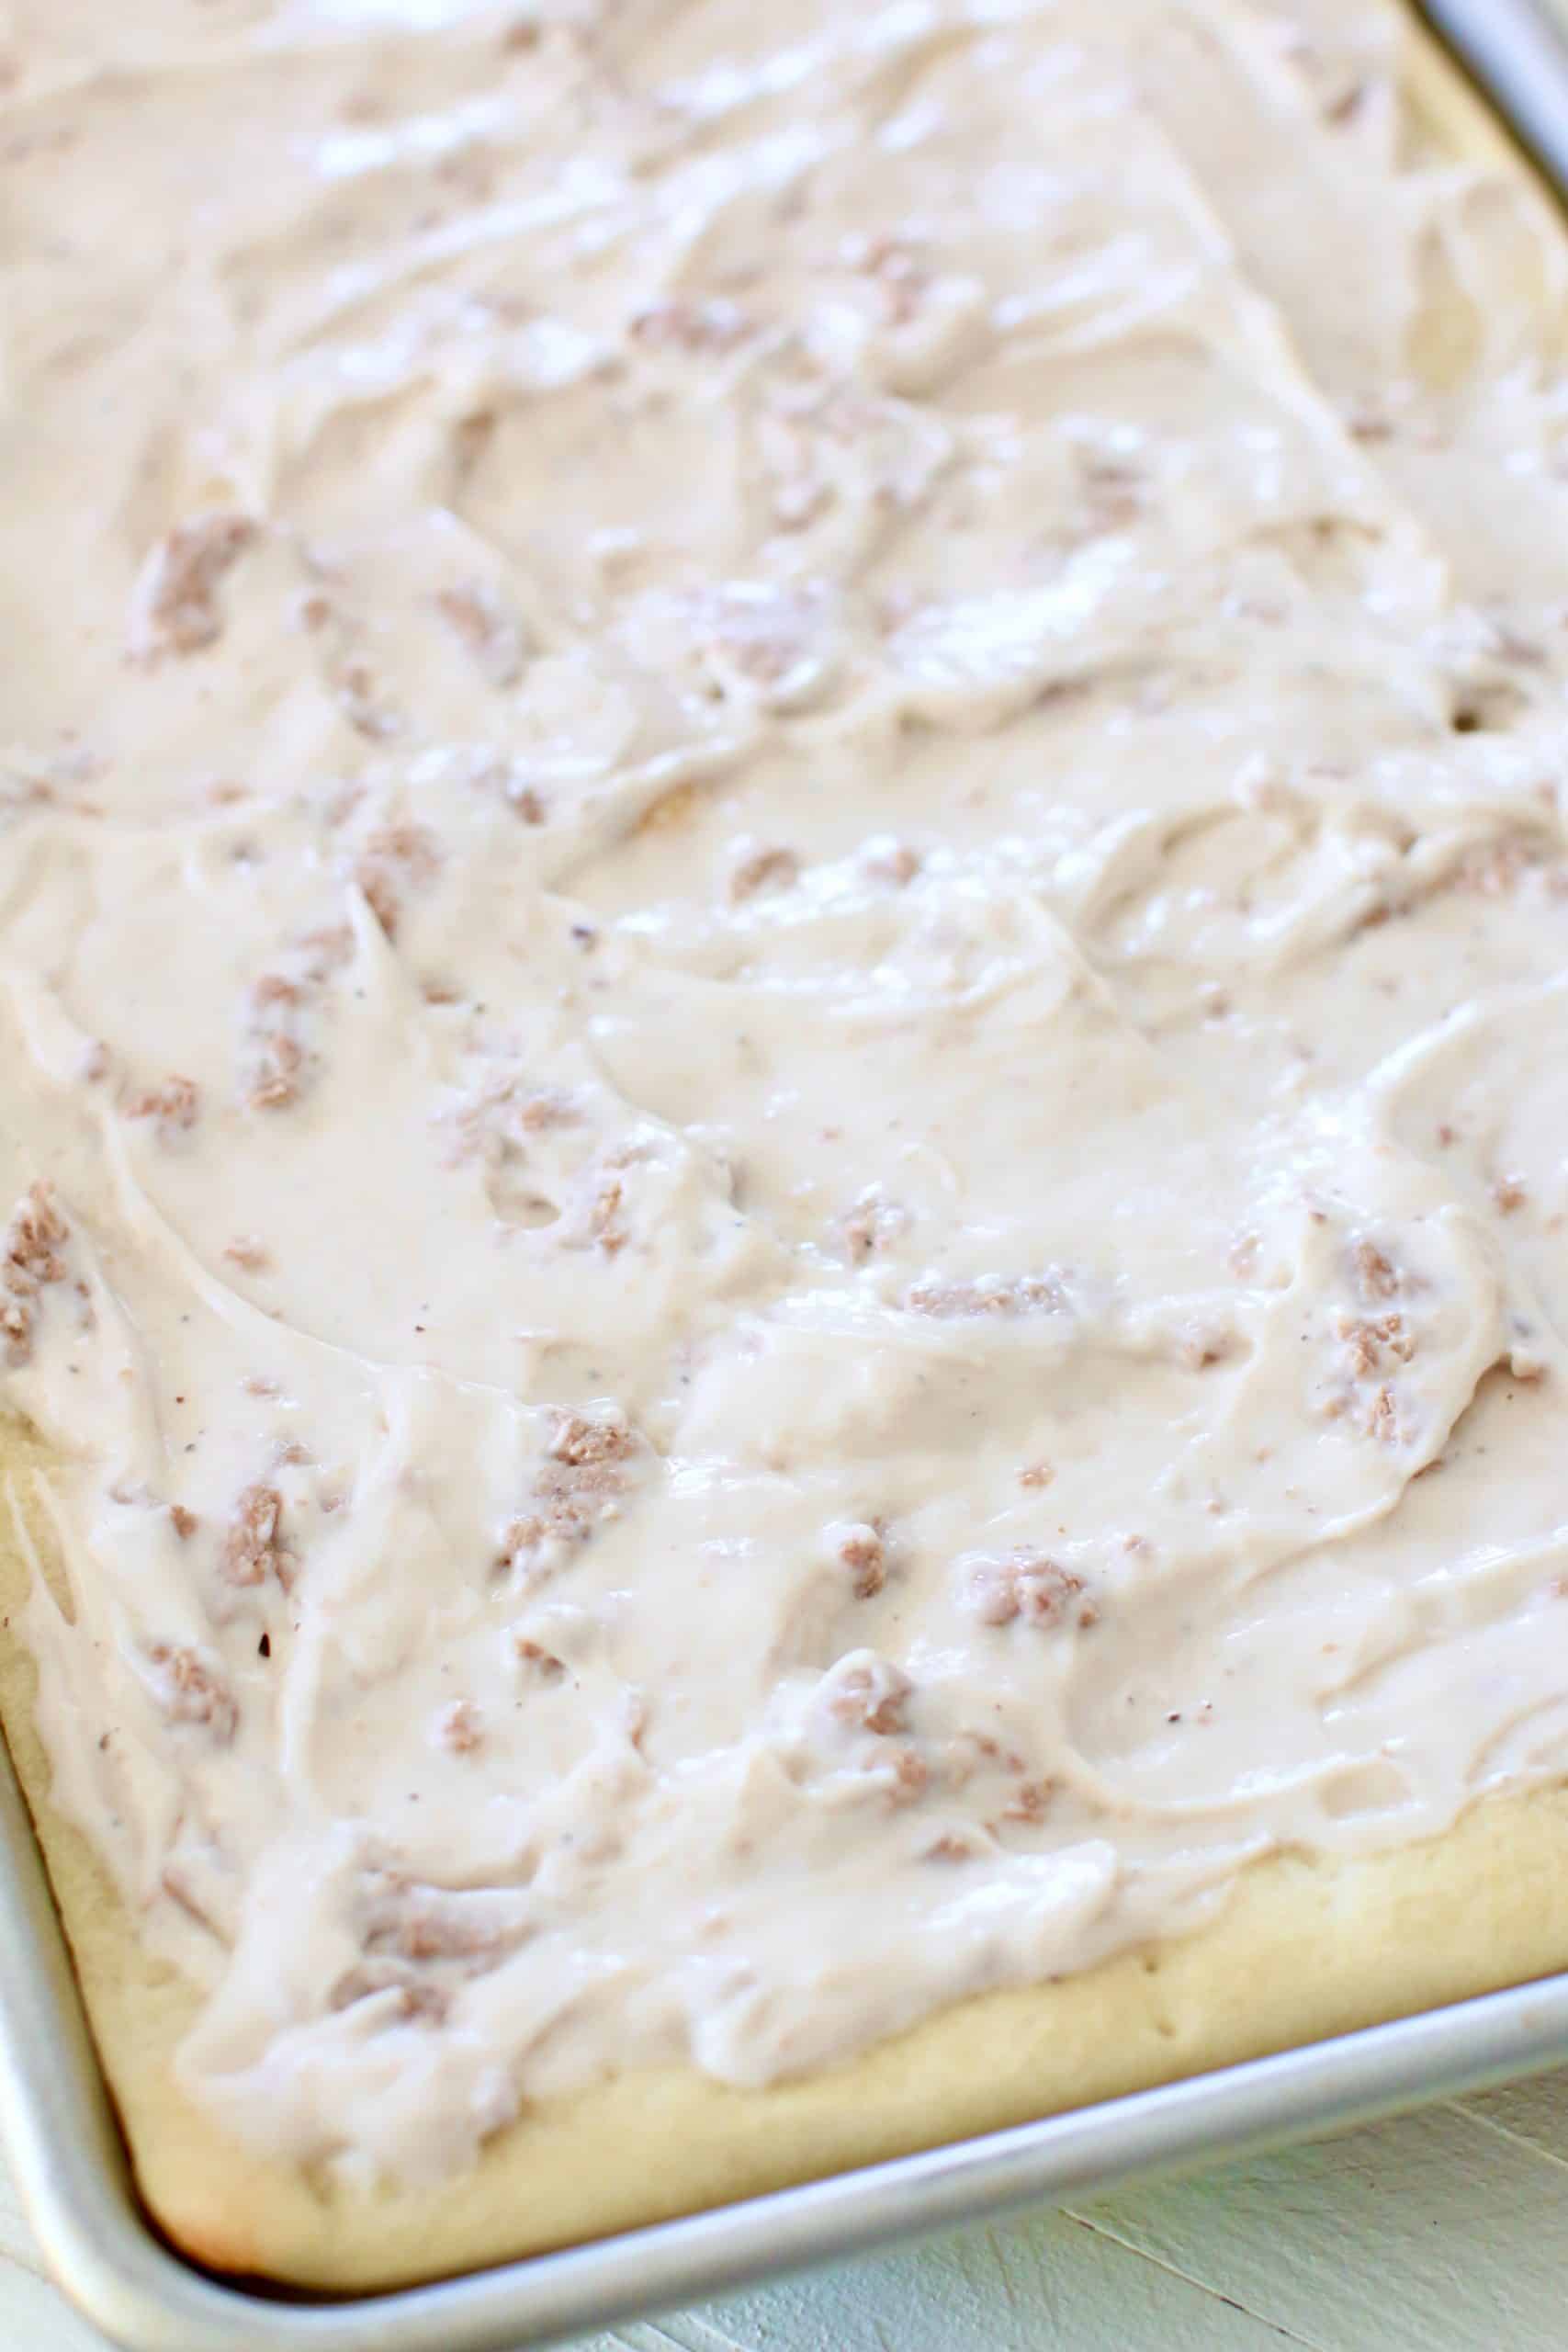 creamy white sausage gravy spread out on pizza crust in baking pan.